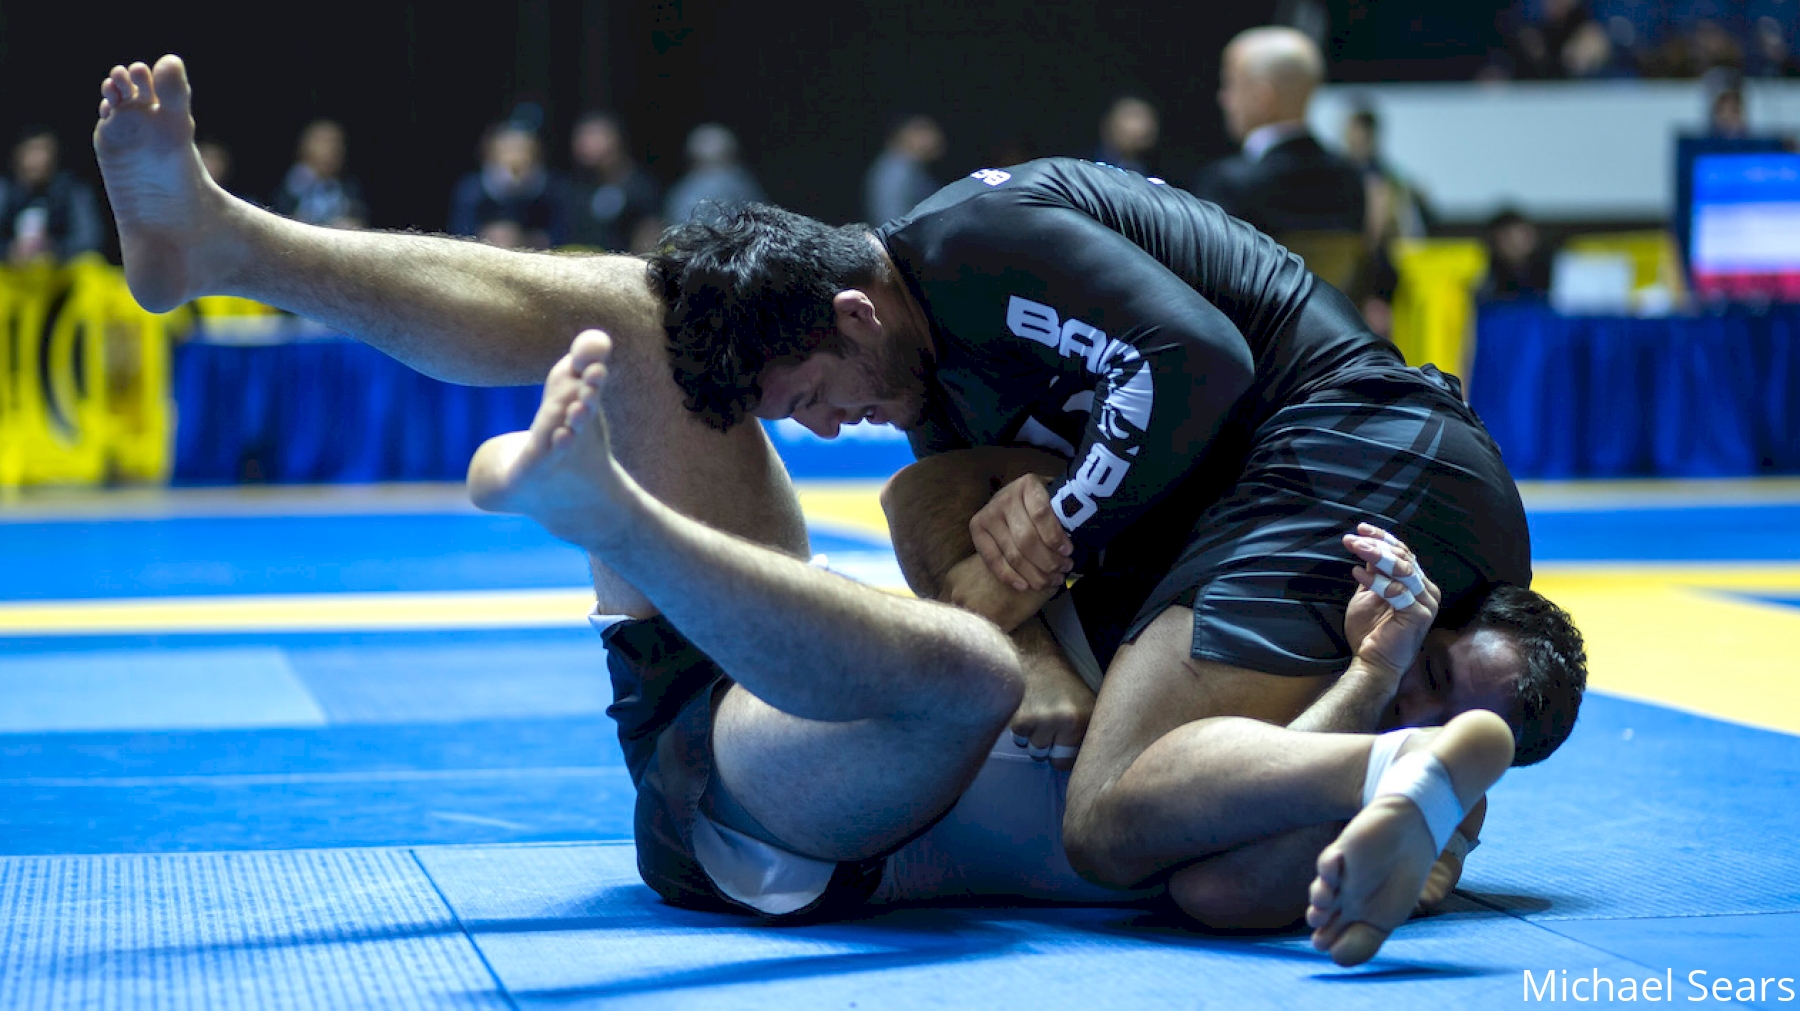 Division Previews The Biggest Stories At The IBJJF 2021 NoGi Pans